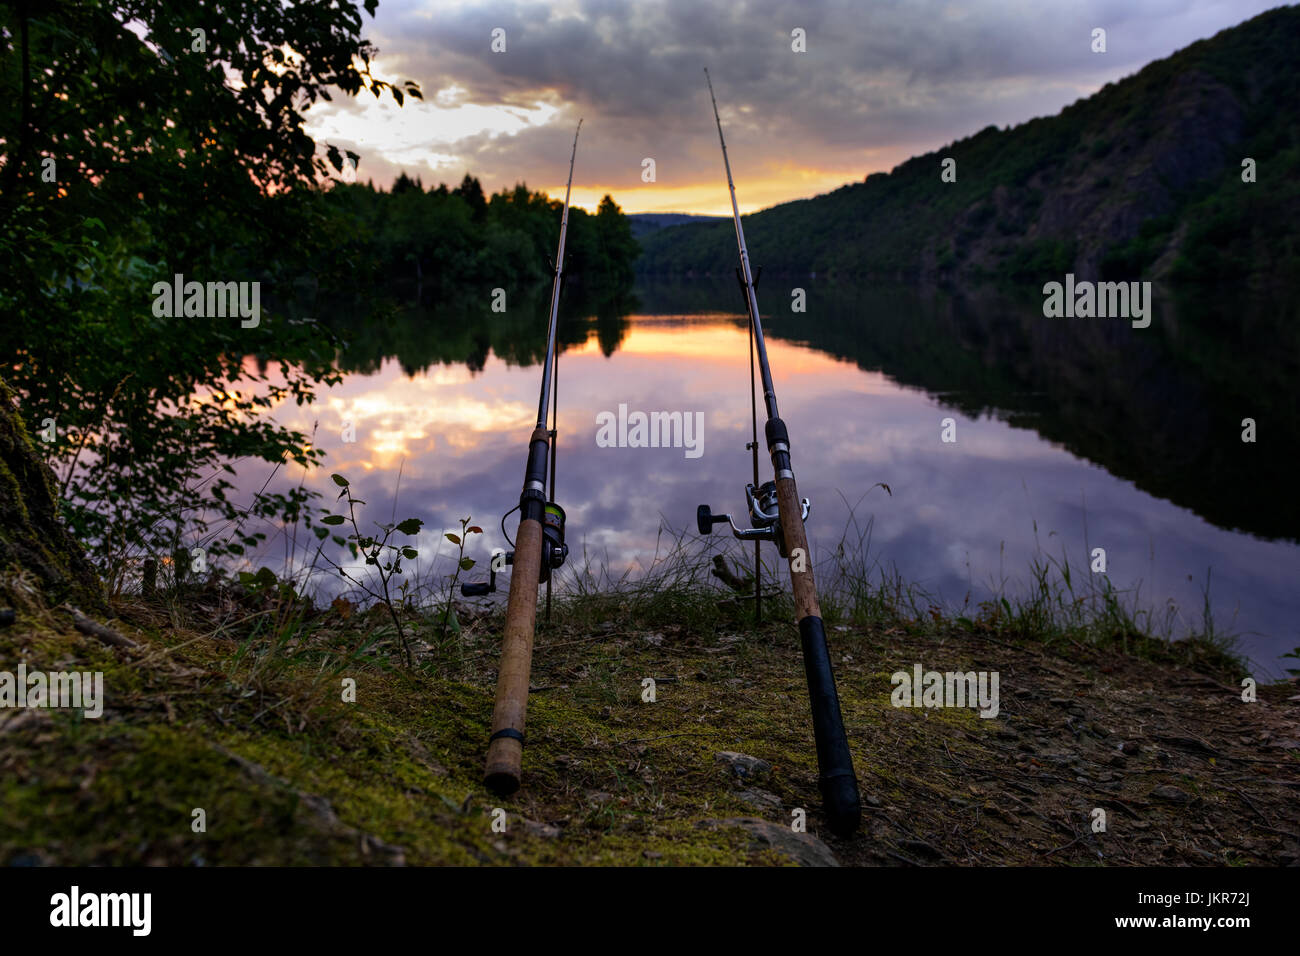 Freshwater fishing with rods on Vltava at sunset, Czech Republic Stock Photo